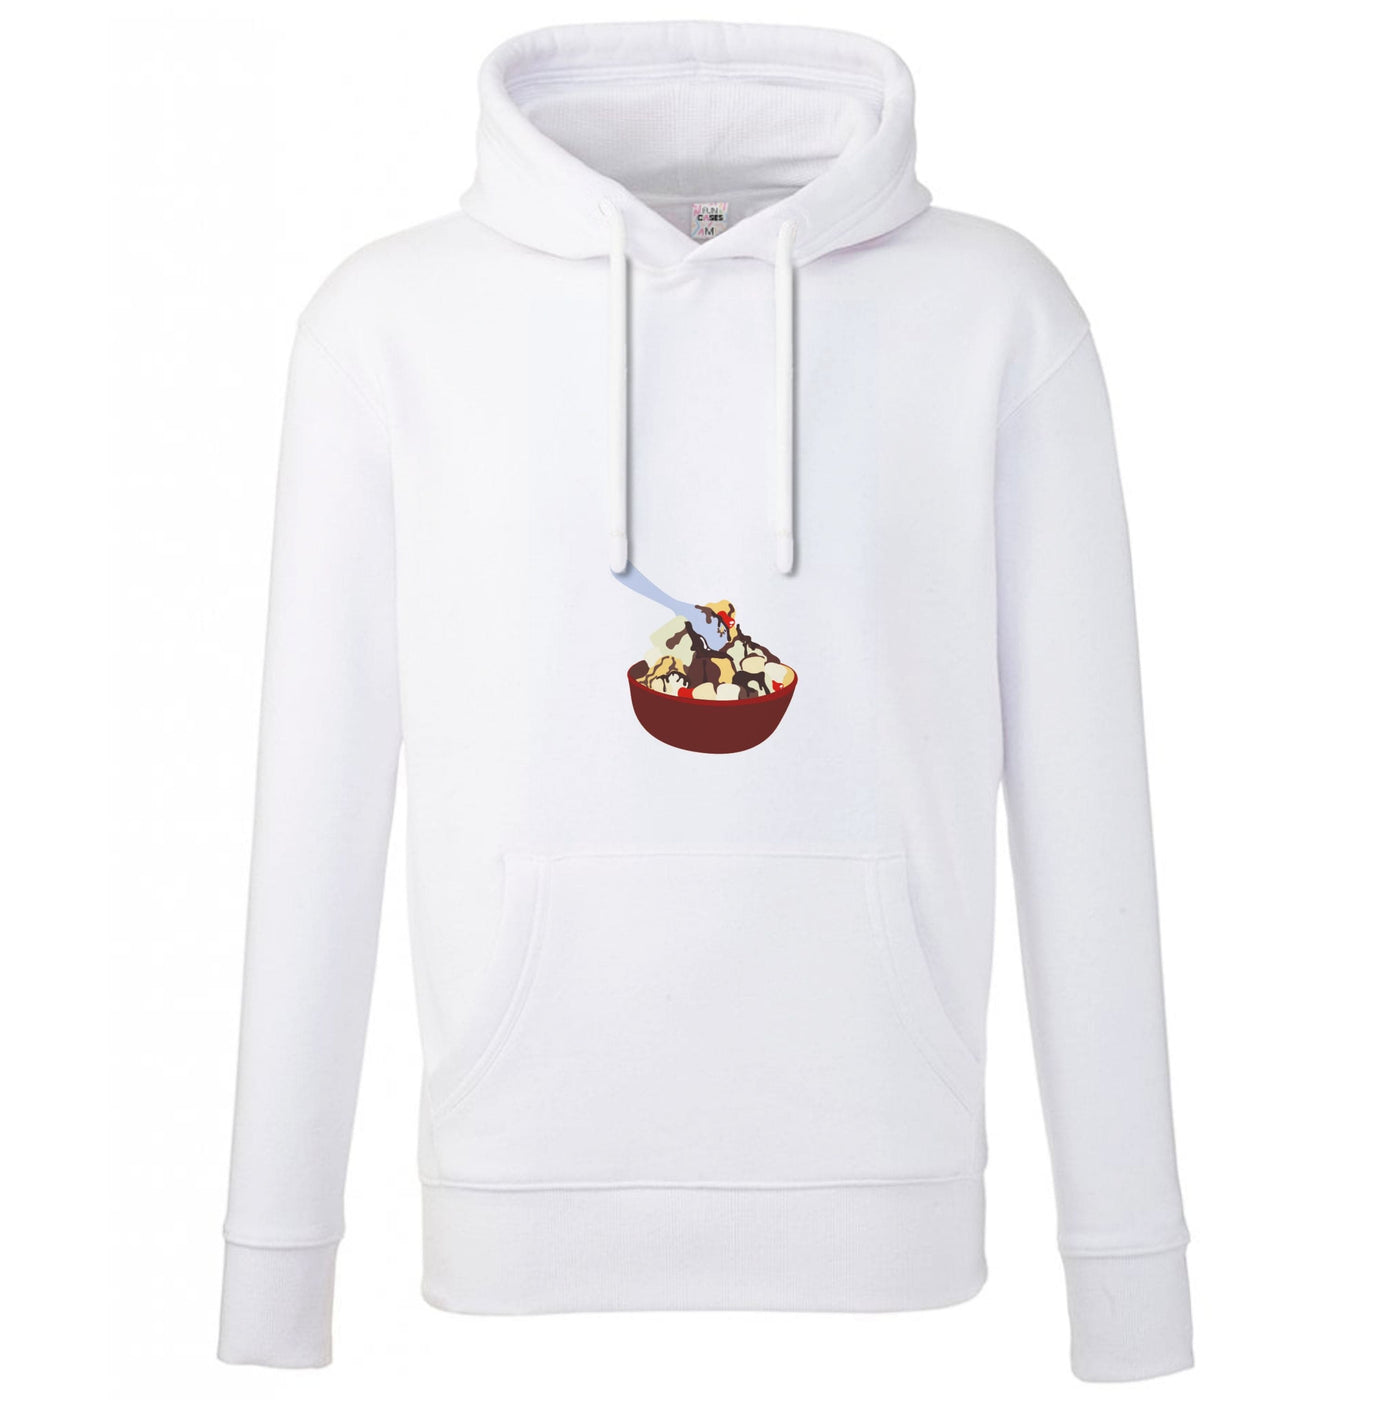 Bowl Of Ice Cream - Home Alone Hoodie